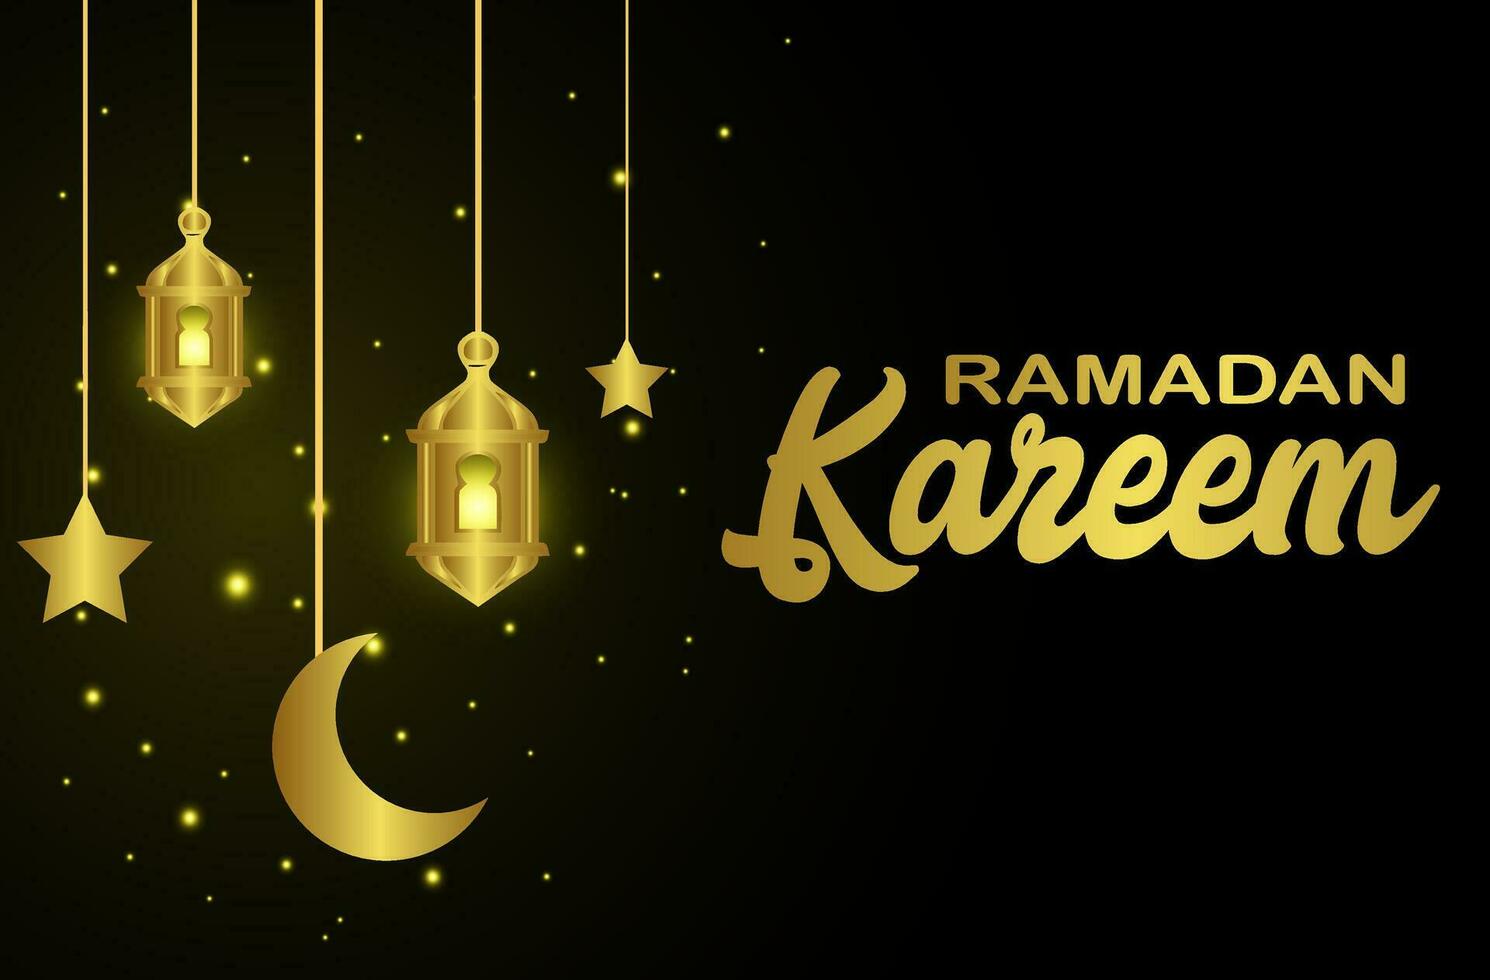 Islamic Crescent with mosque for Ramadan Kareem and Eid. Golden Half Moon pattern, background illustration. vector